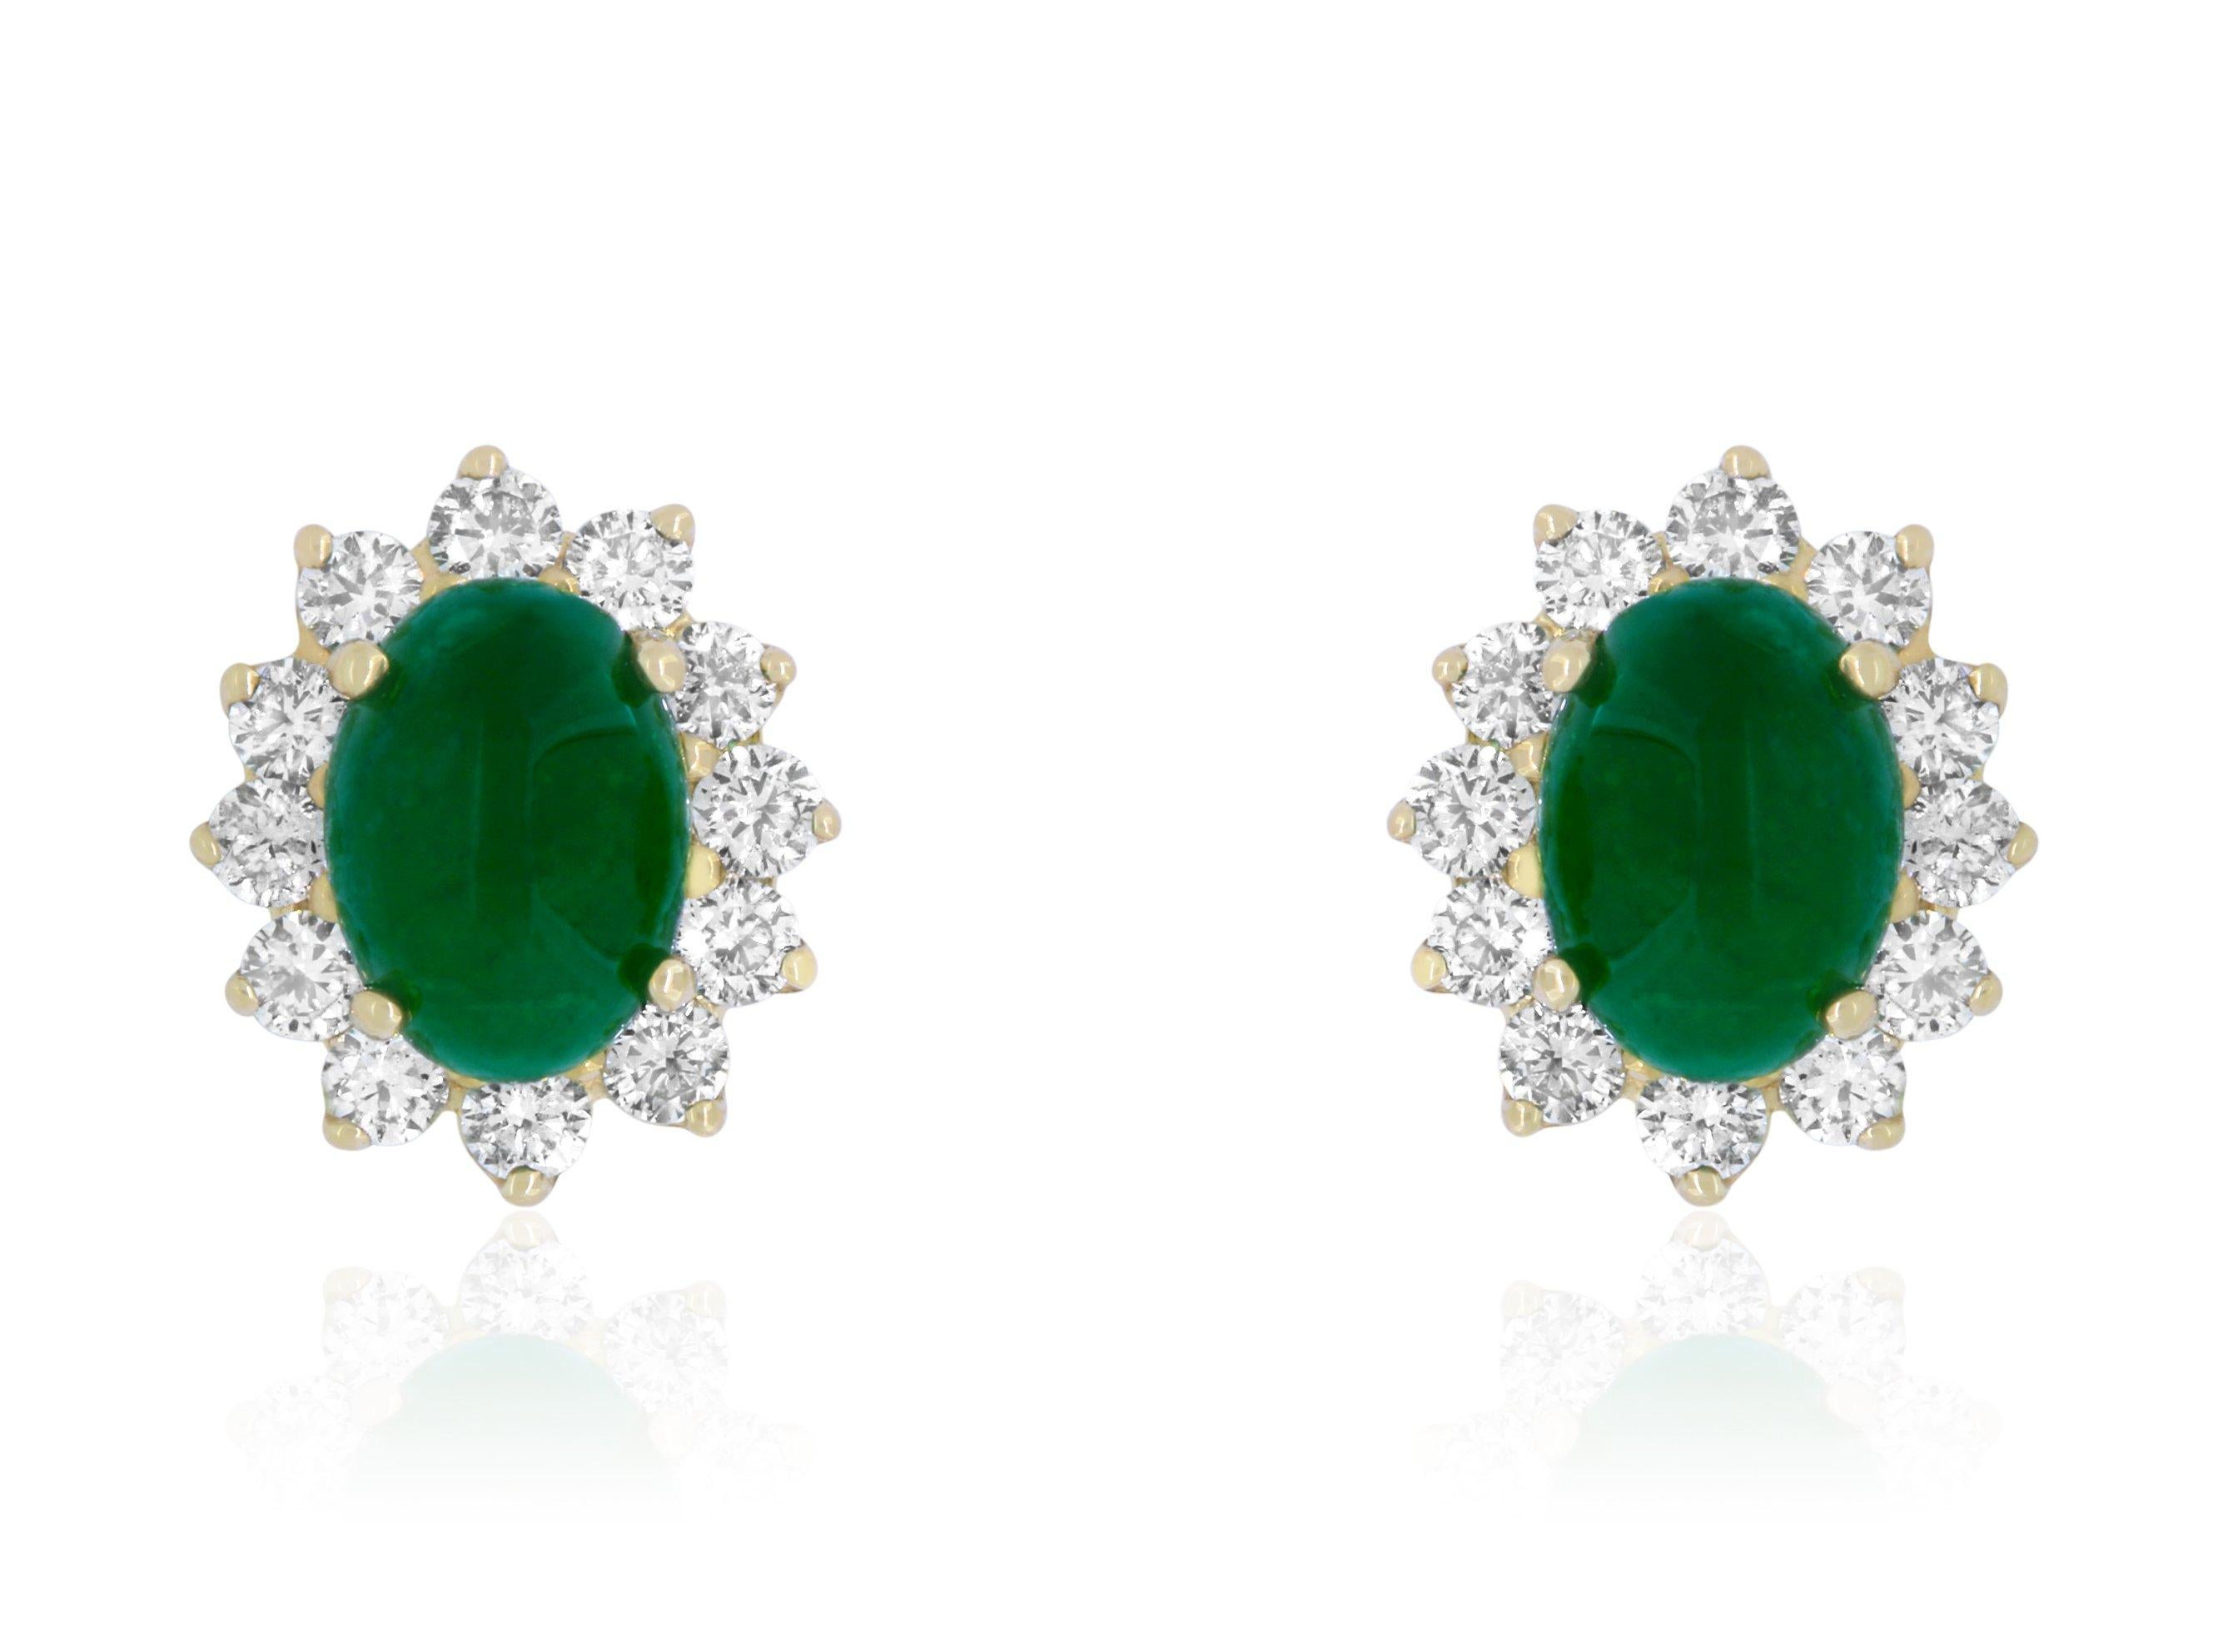 Contemporary Oval Cabochon Emerald and White Diamond Stud Earring in Yellow Gold